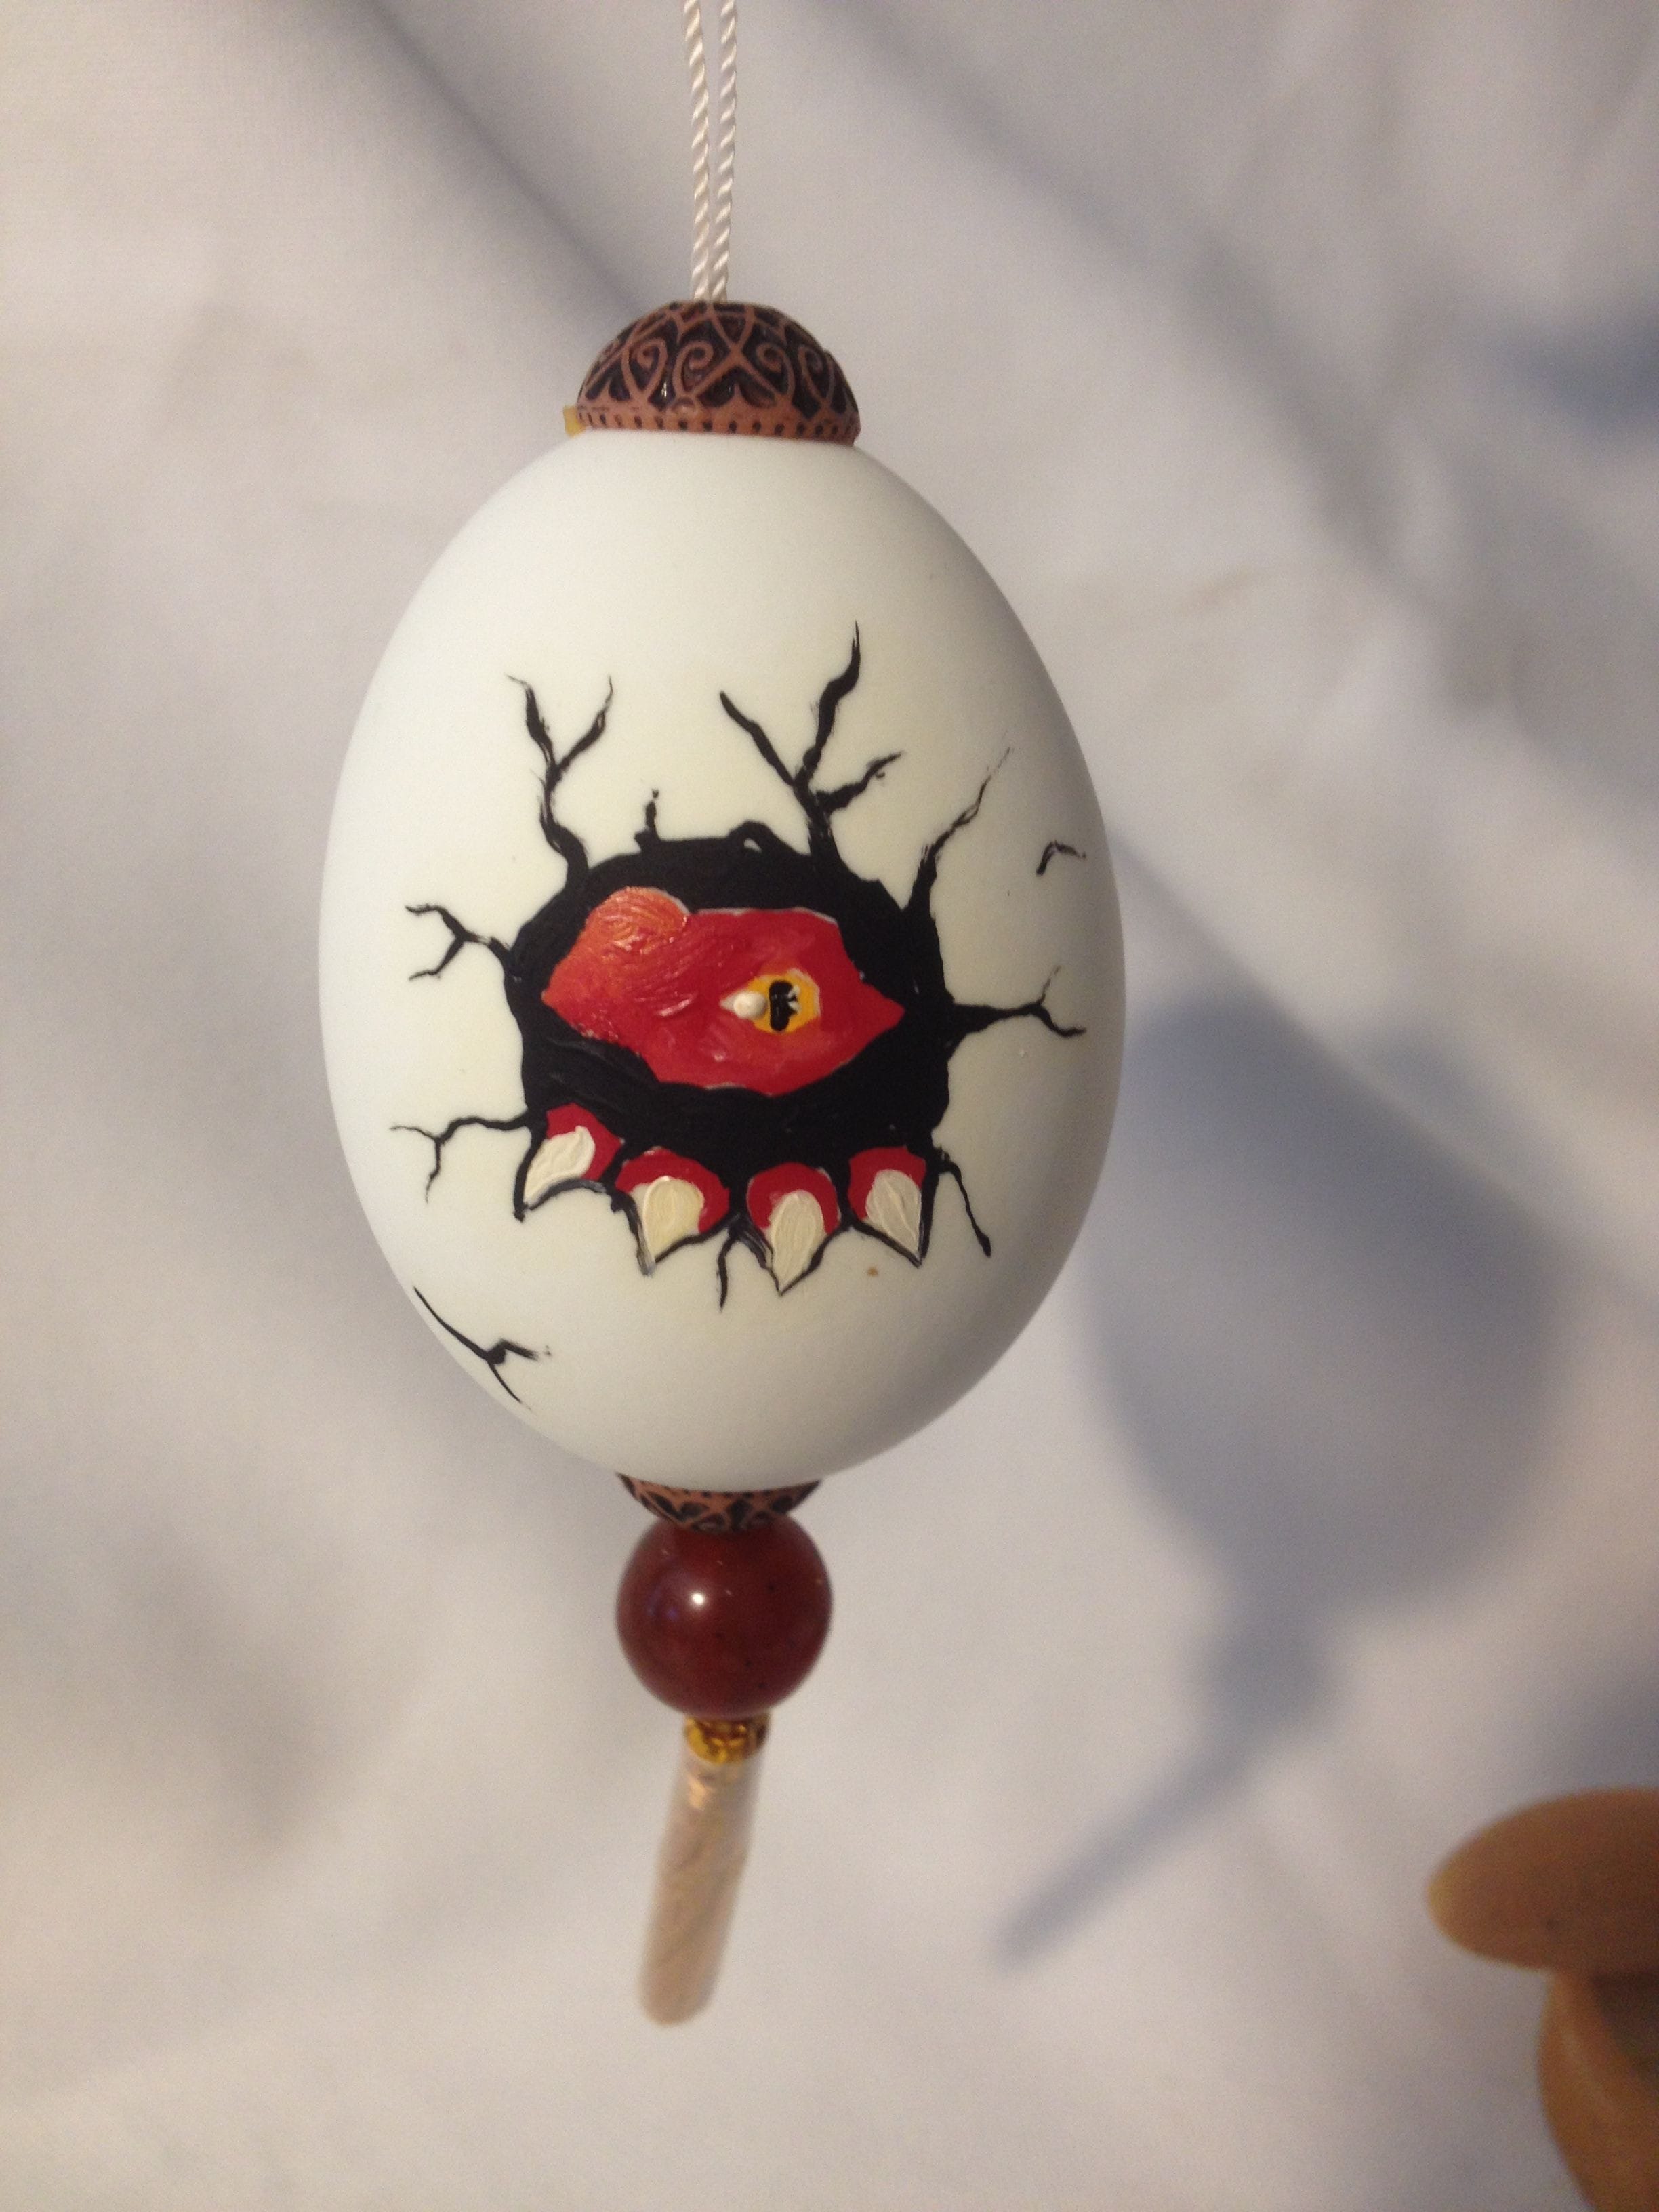 Painted chicken egg with hatching red dragonett $20.